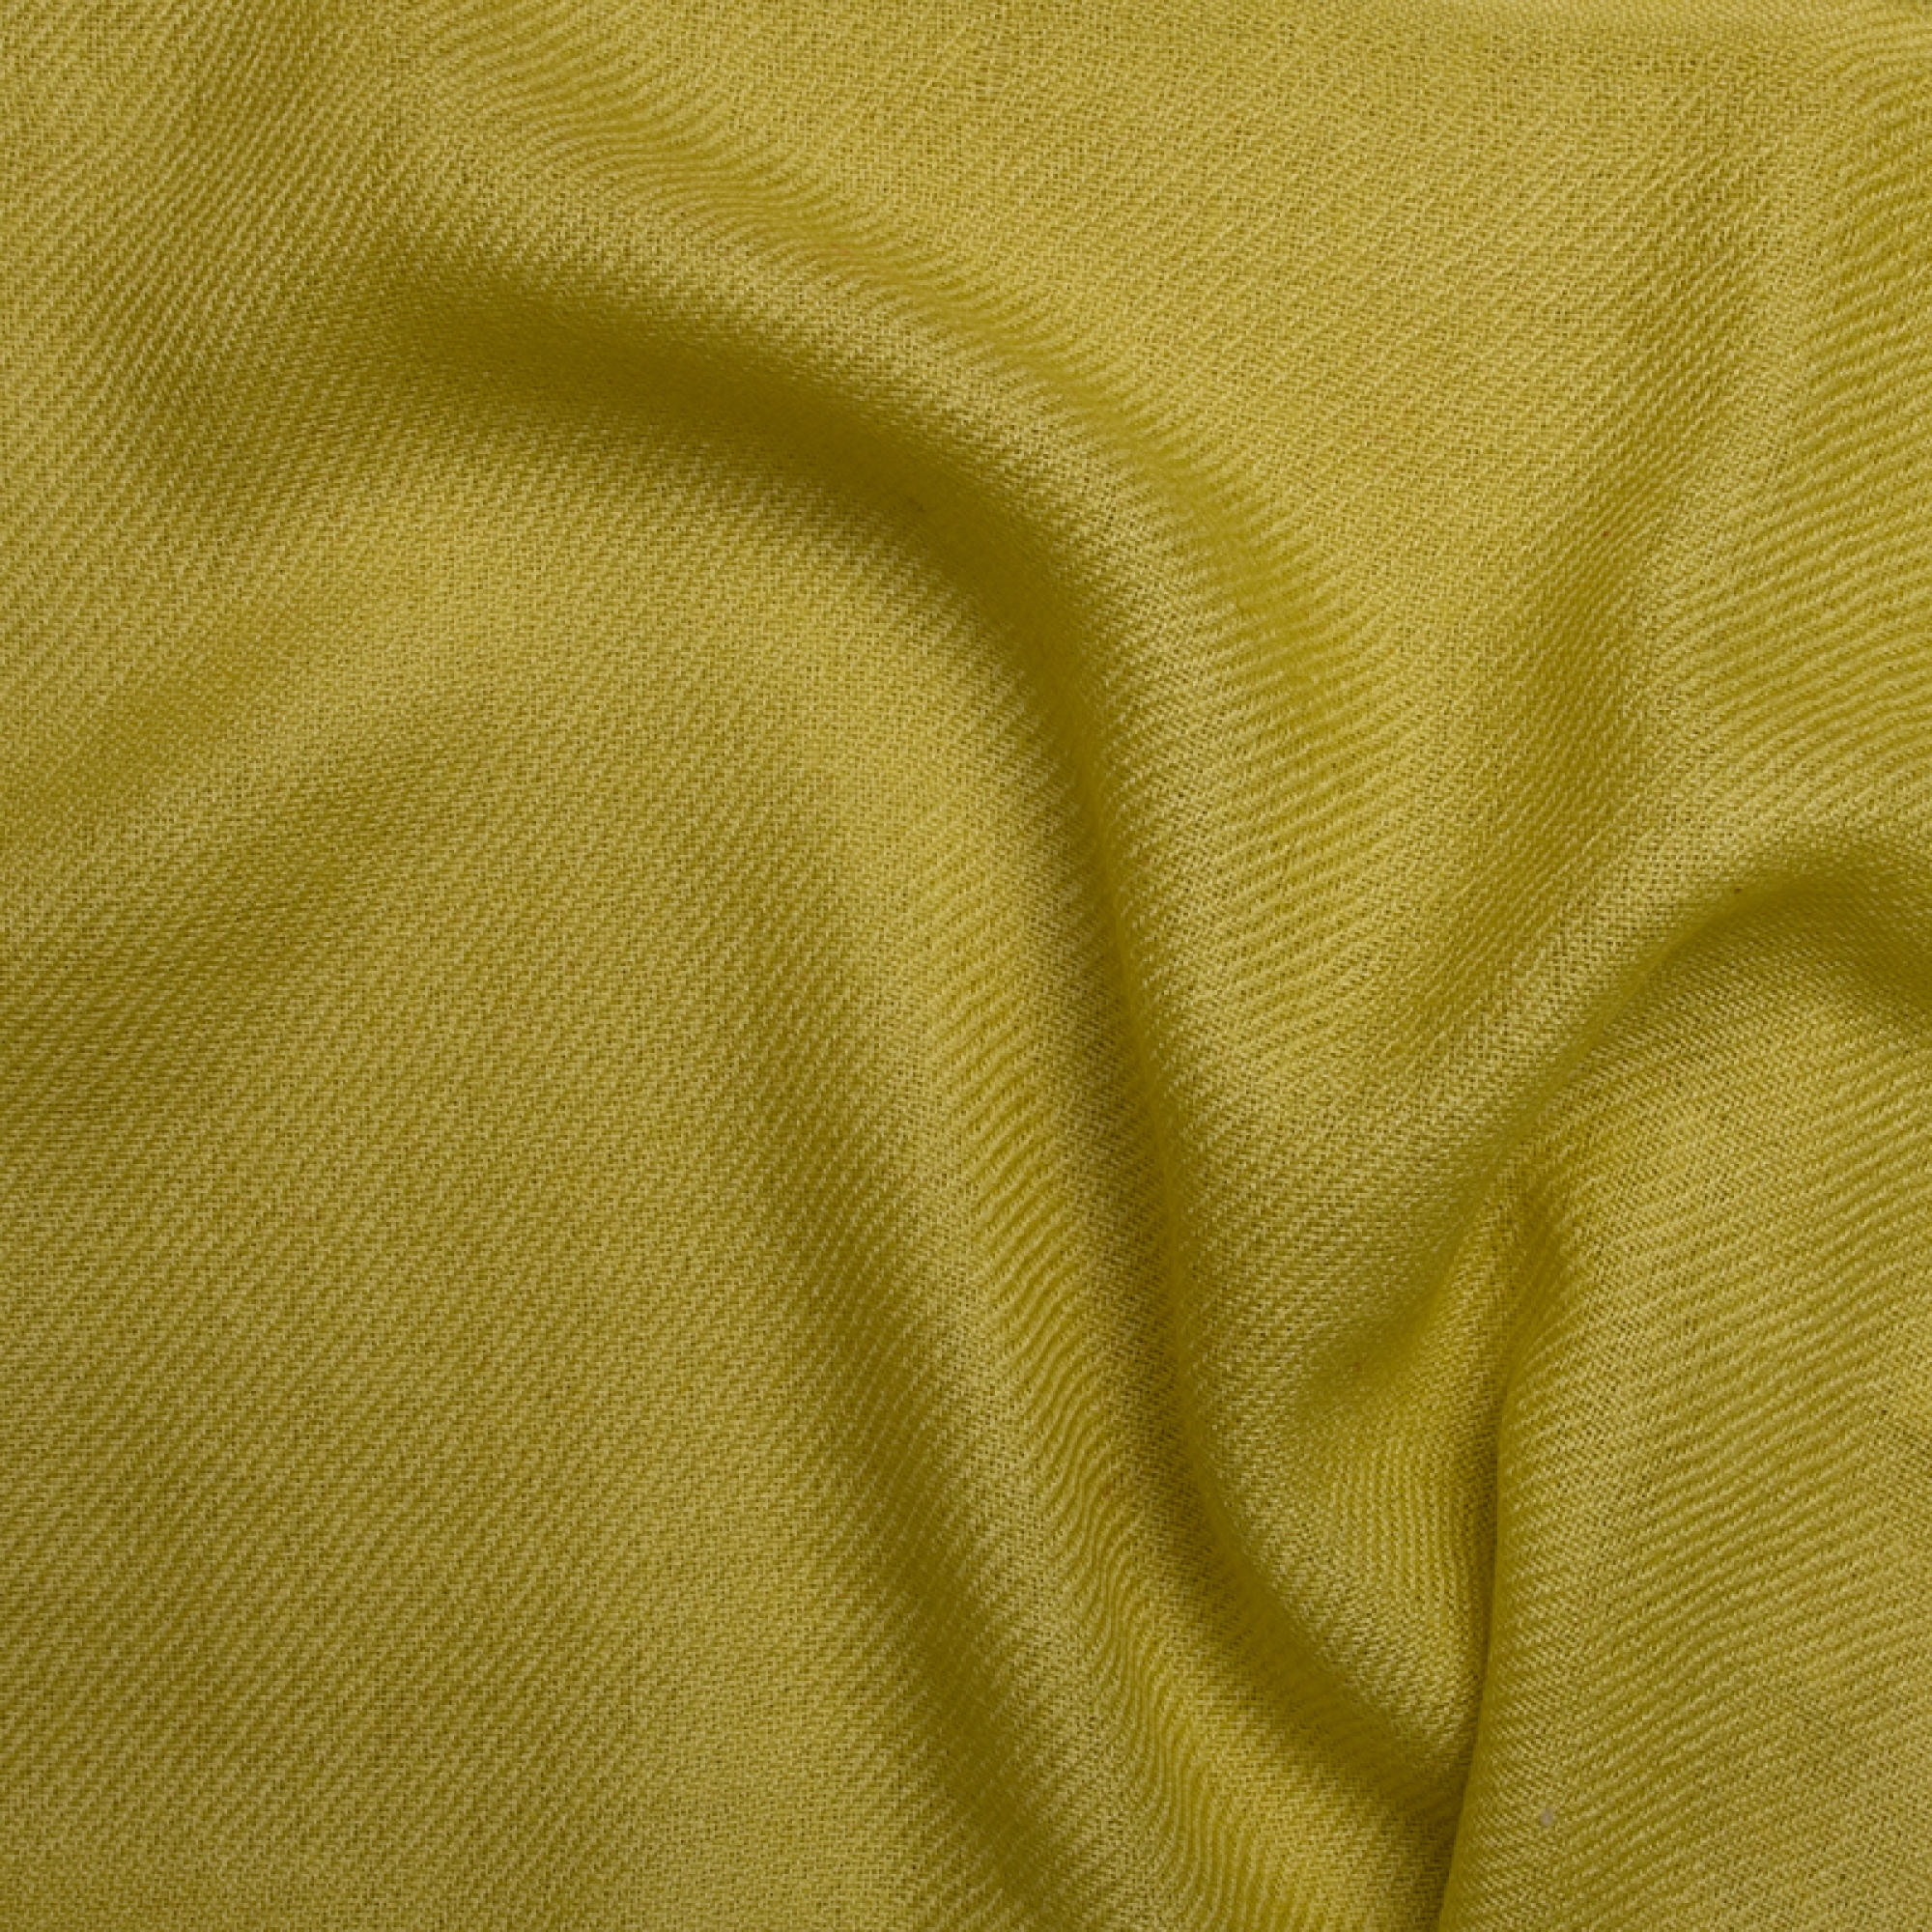 Cashmere accessories blanket toodoo plain m 180 x 220 sunny lime 180 x 220 cm